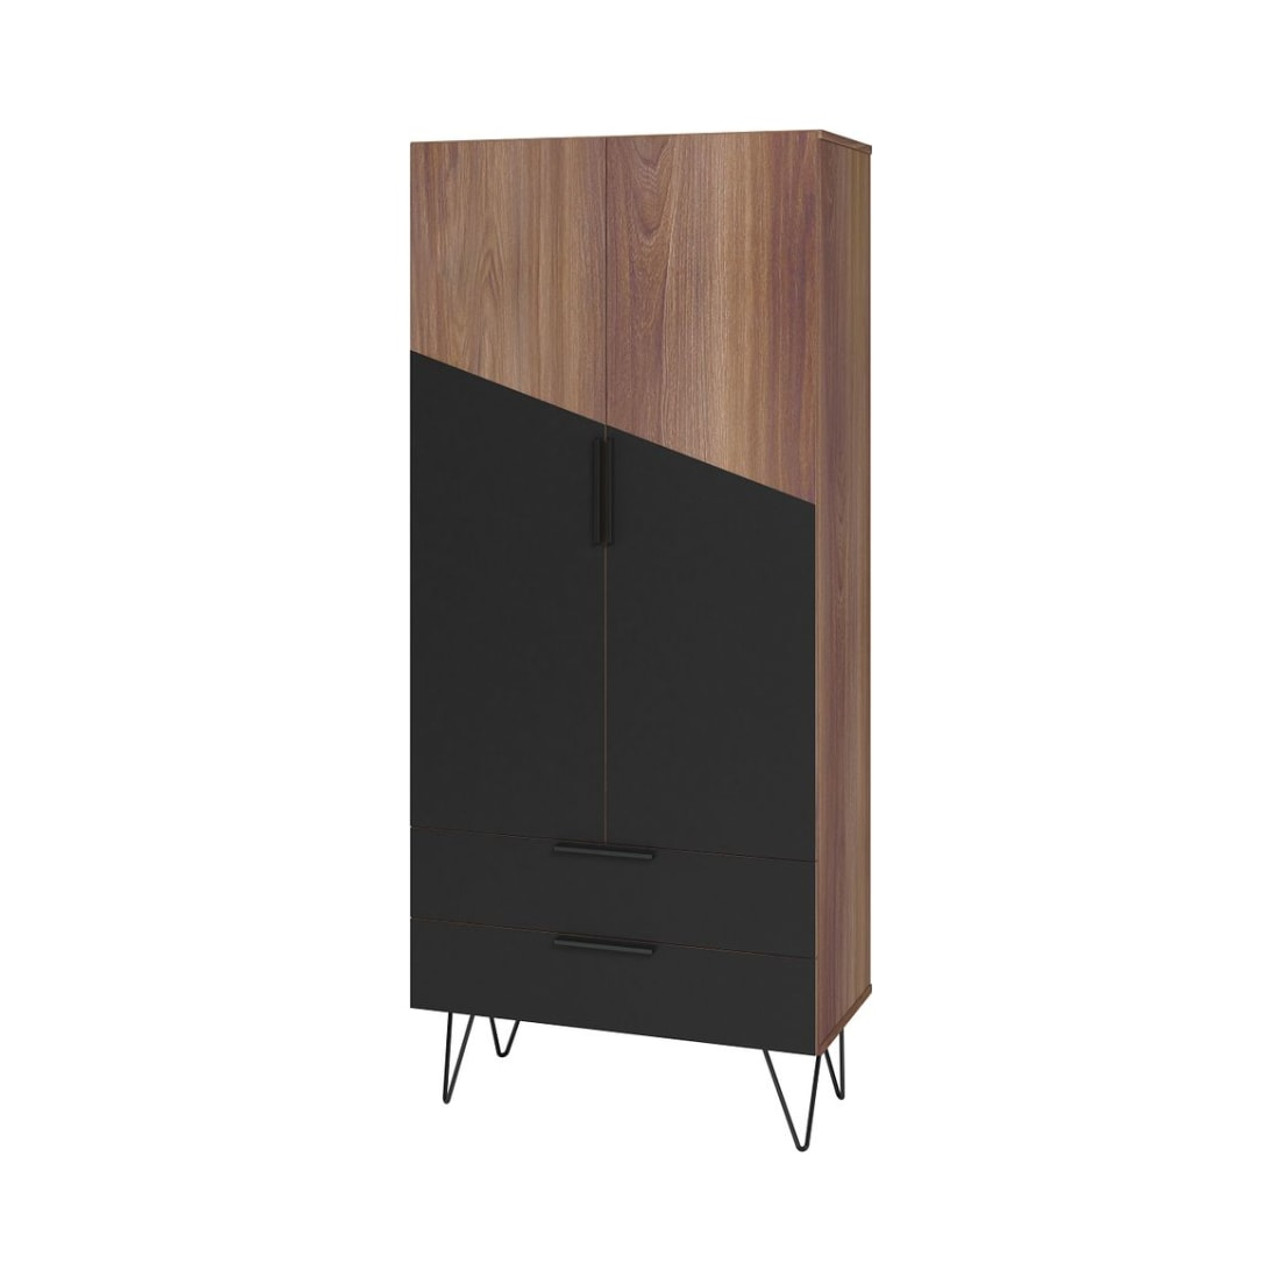 Beekman 67.32" Tall Cabinet in Brown and Black